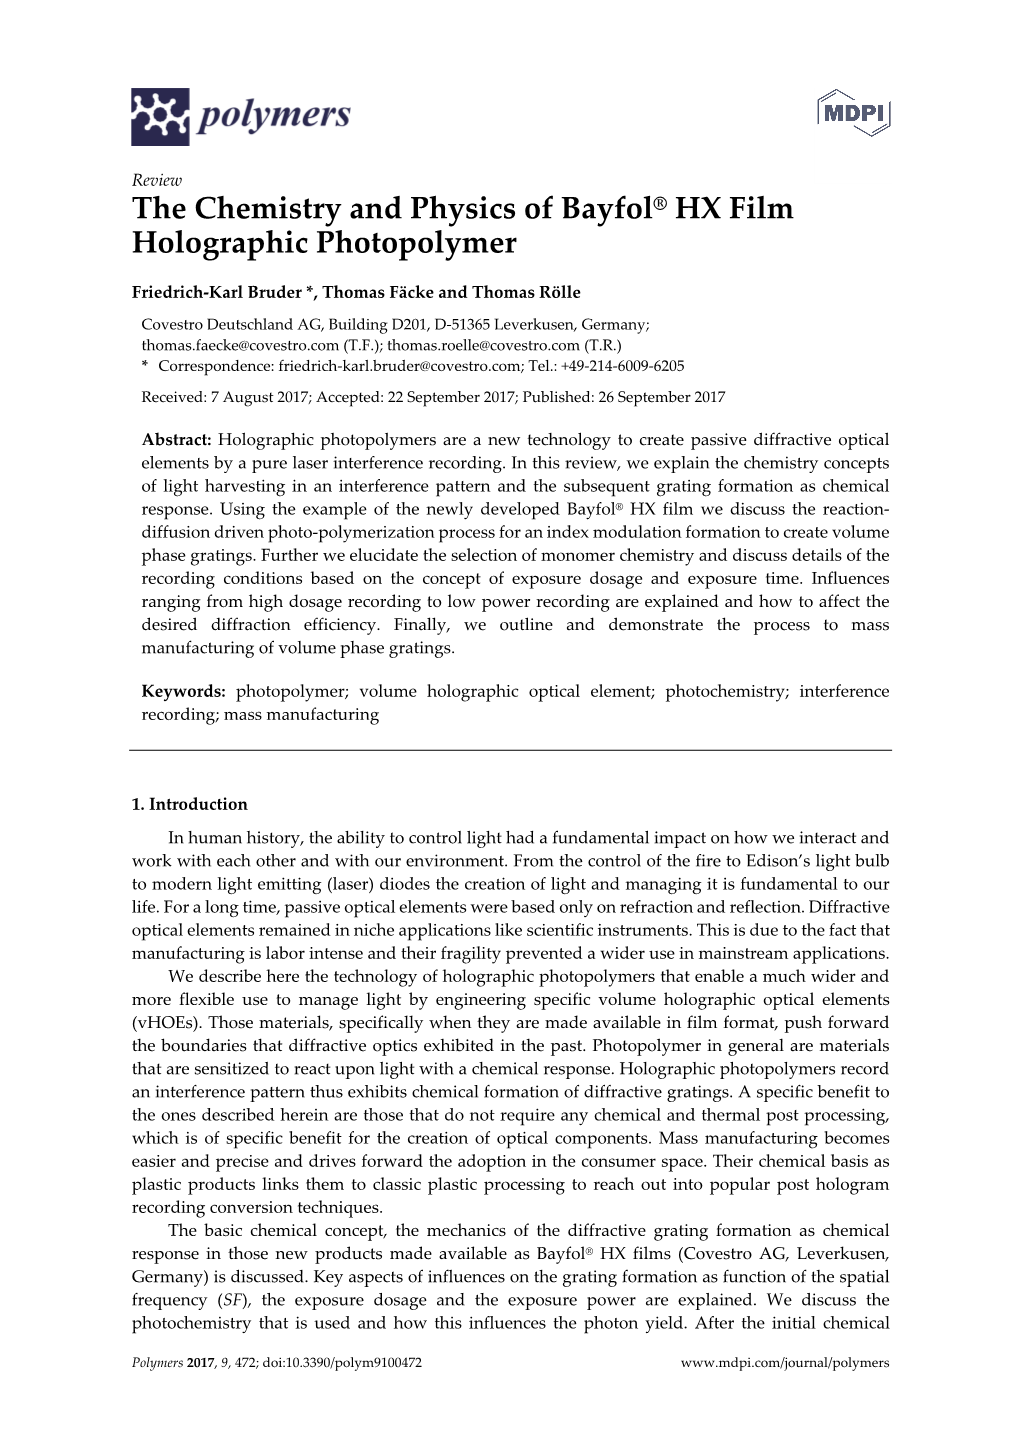 The Chemistry and Physics of Bayfol® HX Film Holographic Photopolymer